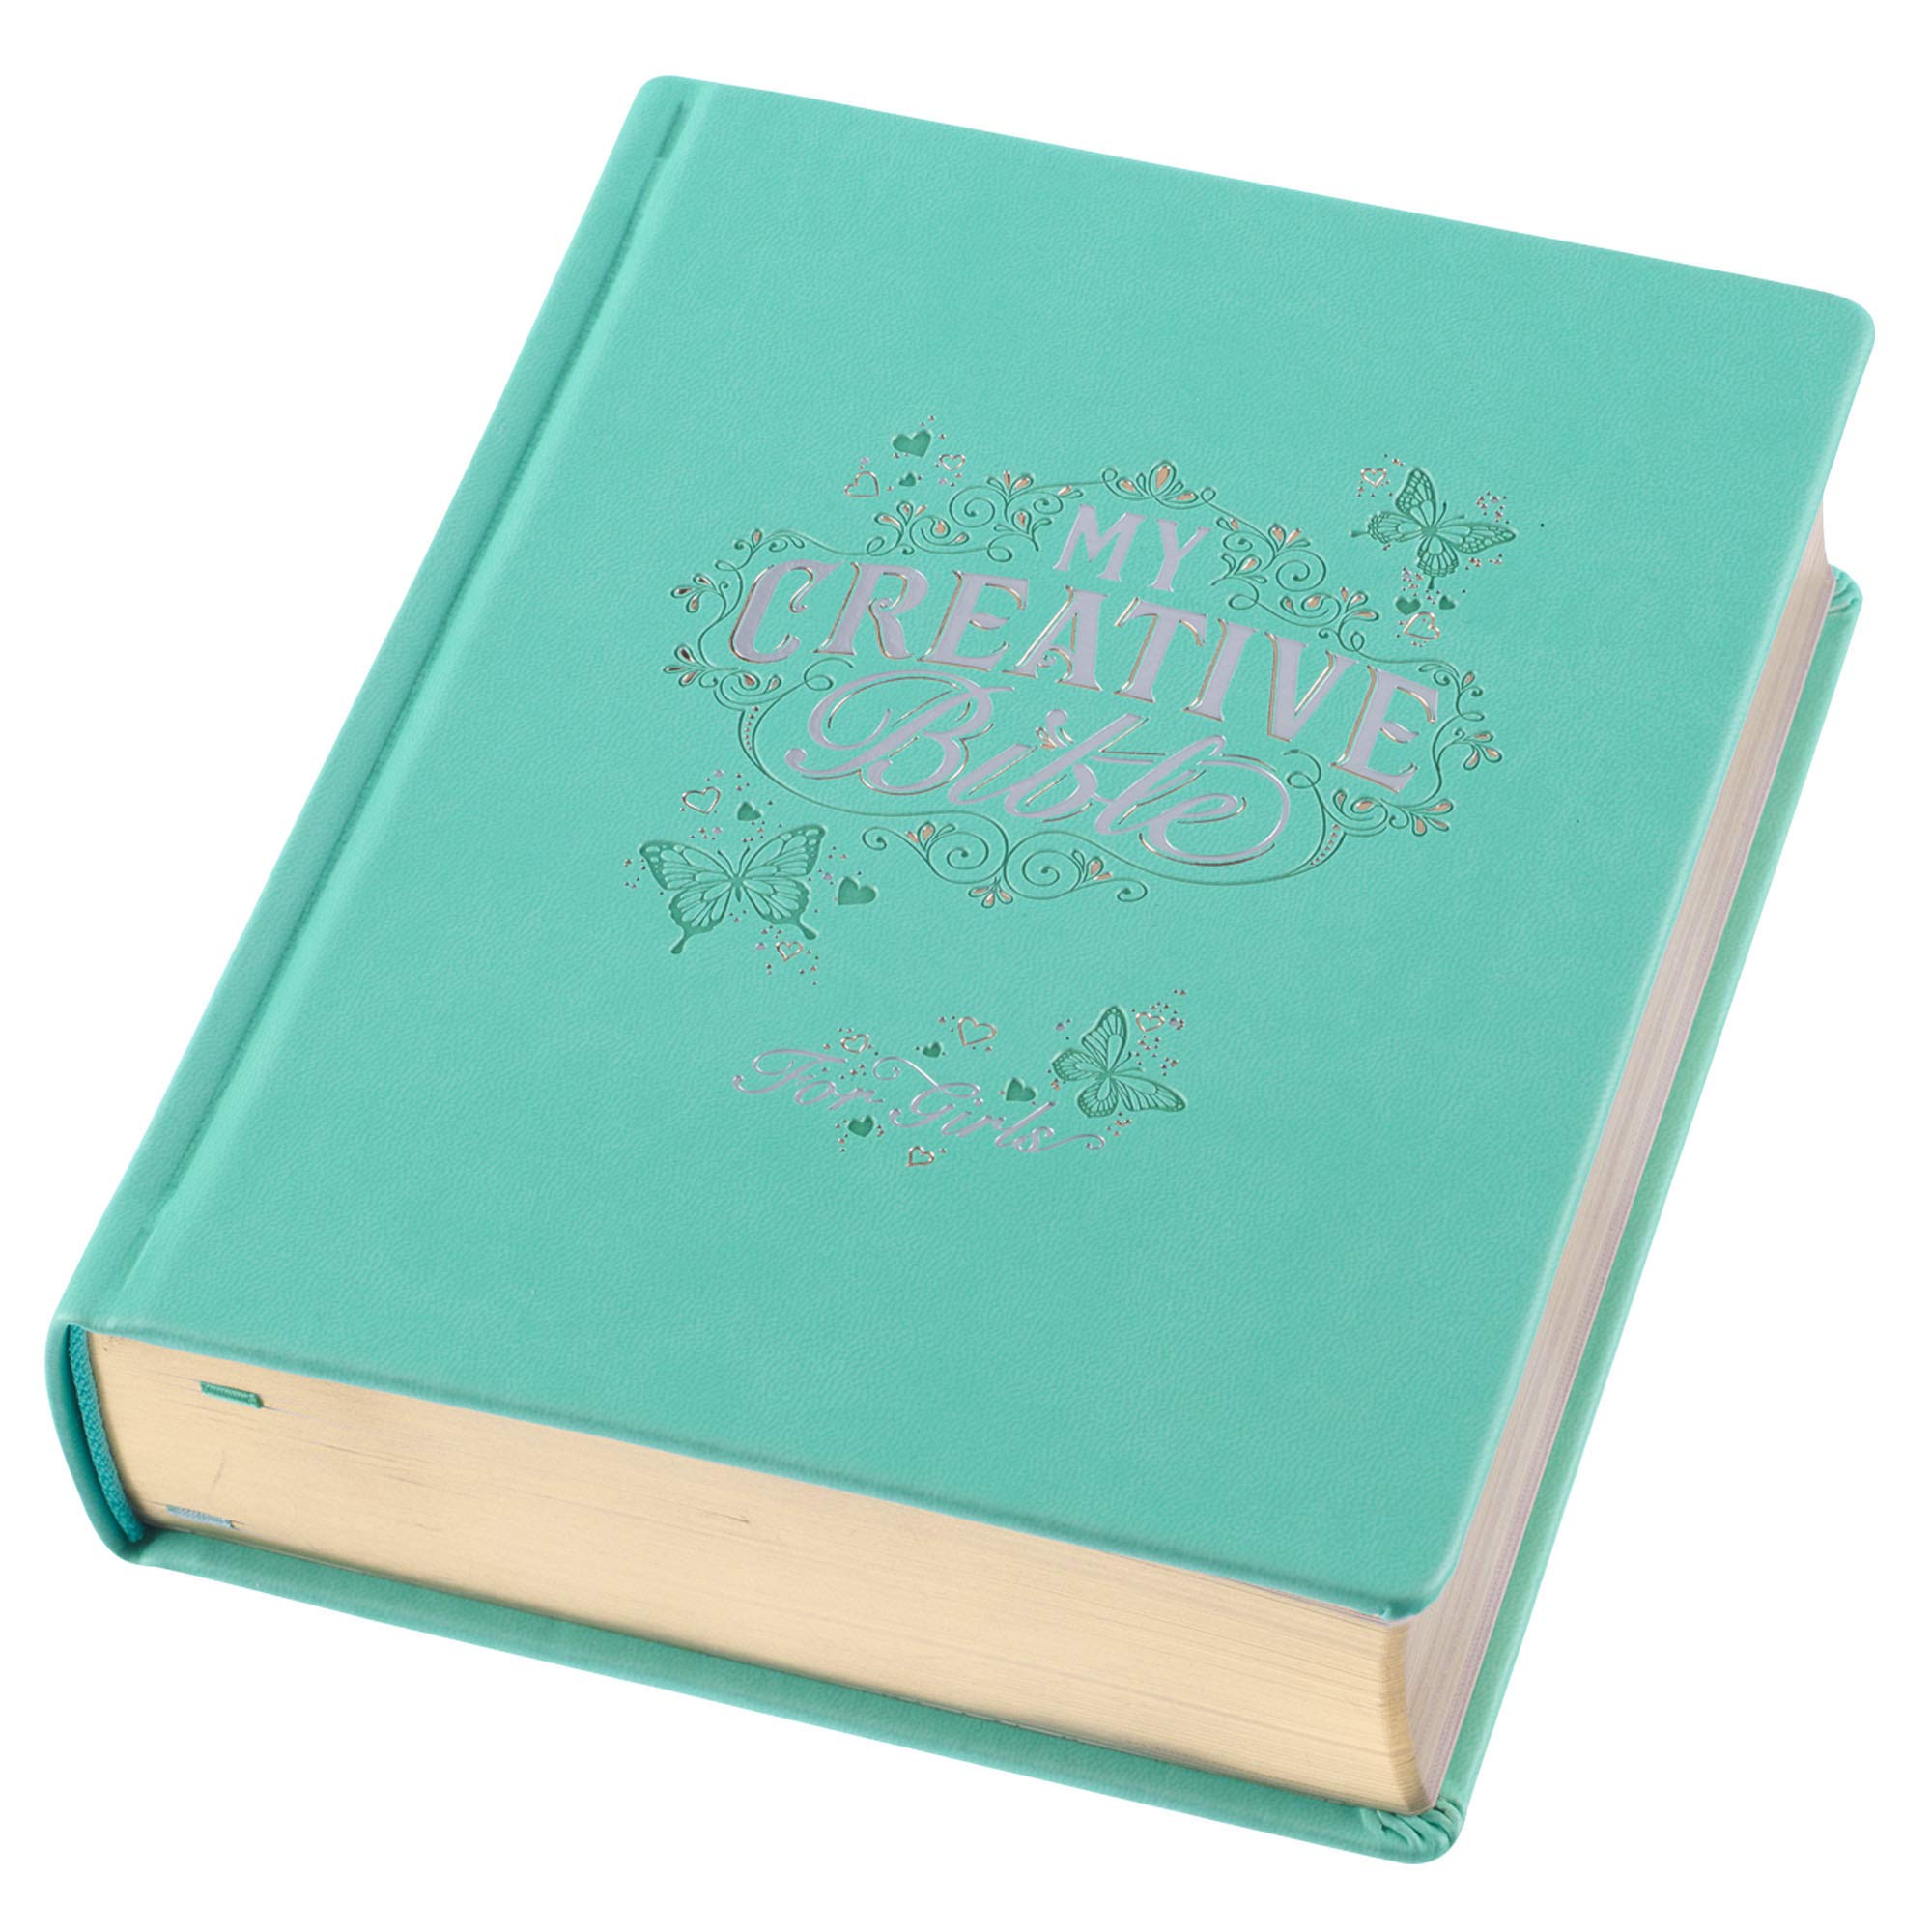 ESV Holy Bible, My Creative Bible For Girls, Faux Leather Hardcover w/Ribbon Marker, Illustrated Coloring, Journaling and Devotional Bible, English Standard Version, Teal